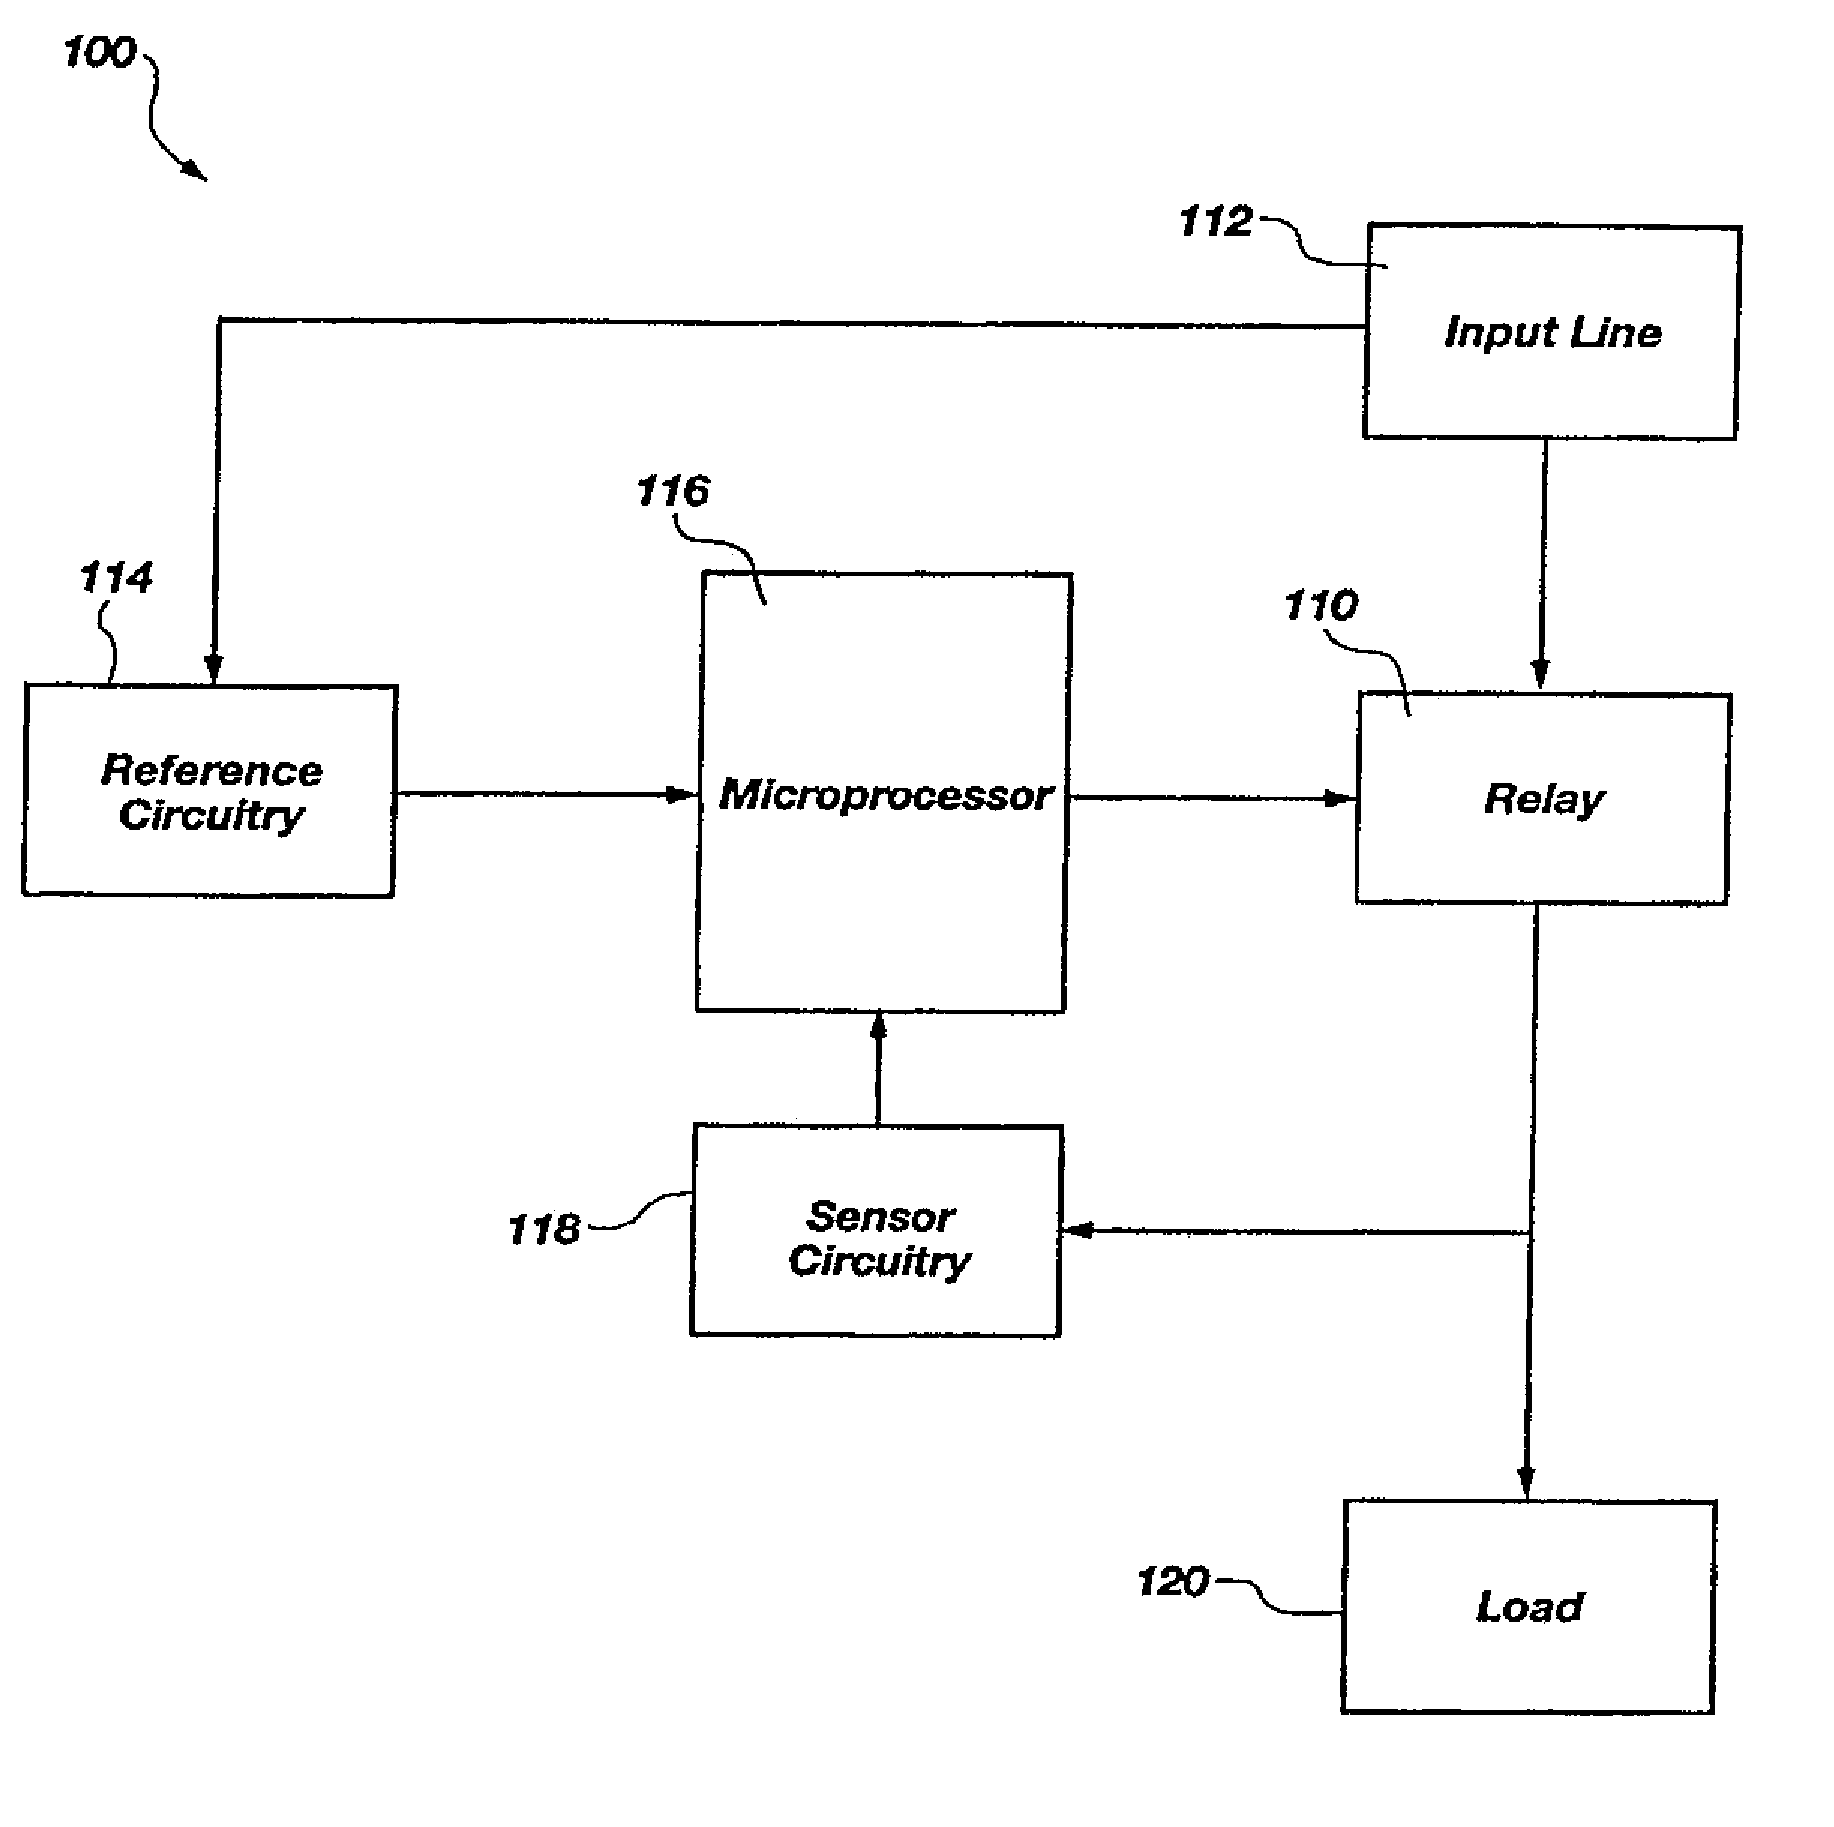 Current zero cross switching relay module using a voltage monitor